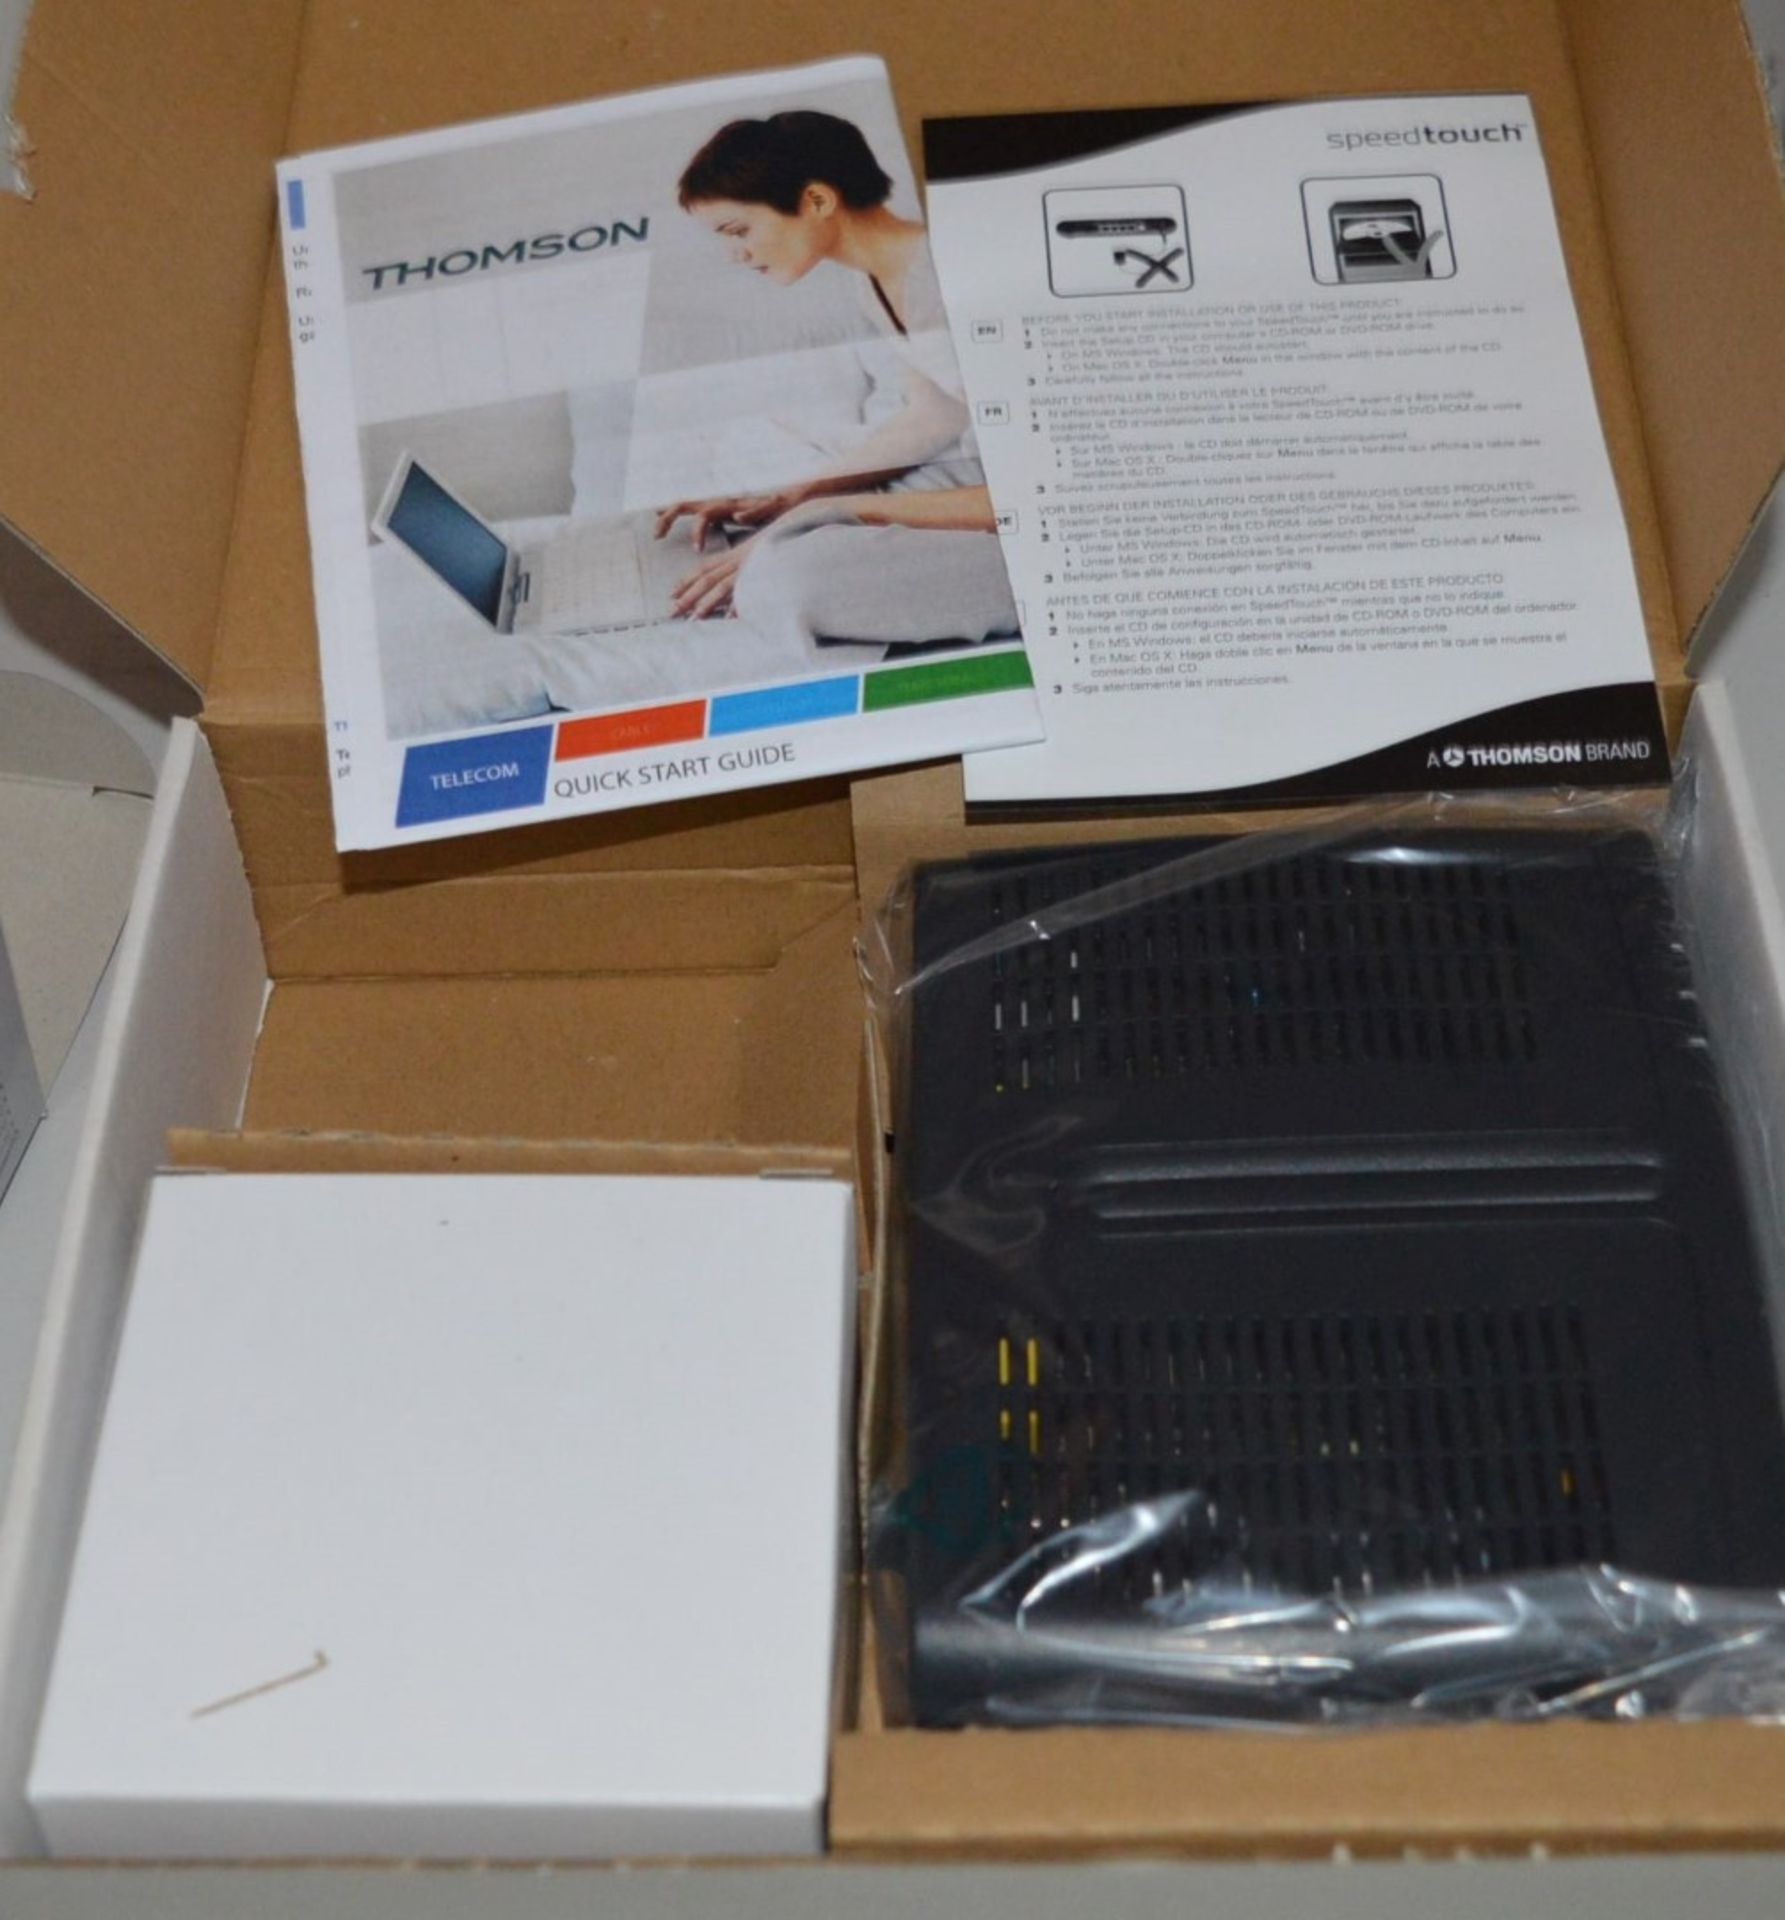 1 x Thompson Speedtouch 546i v6 Multi User ADSL2+ Gateway Router - New Boxed Stock - CL300 - - Image 2 of 2